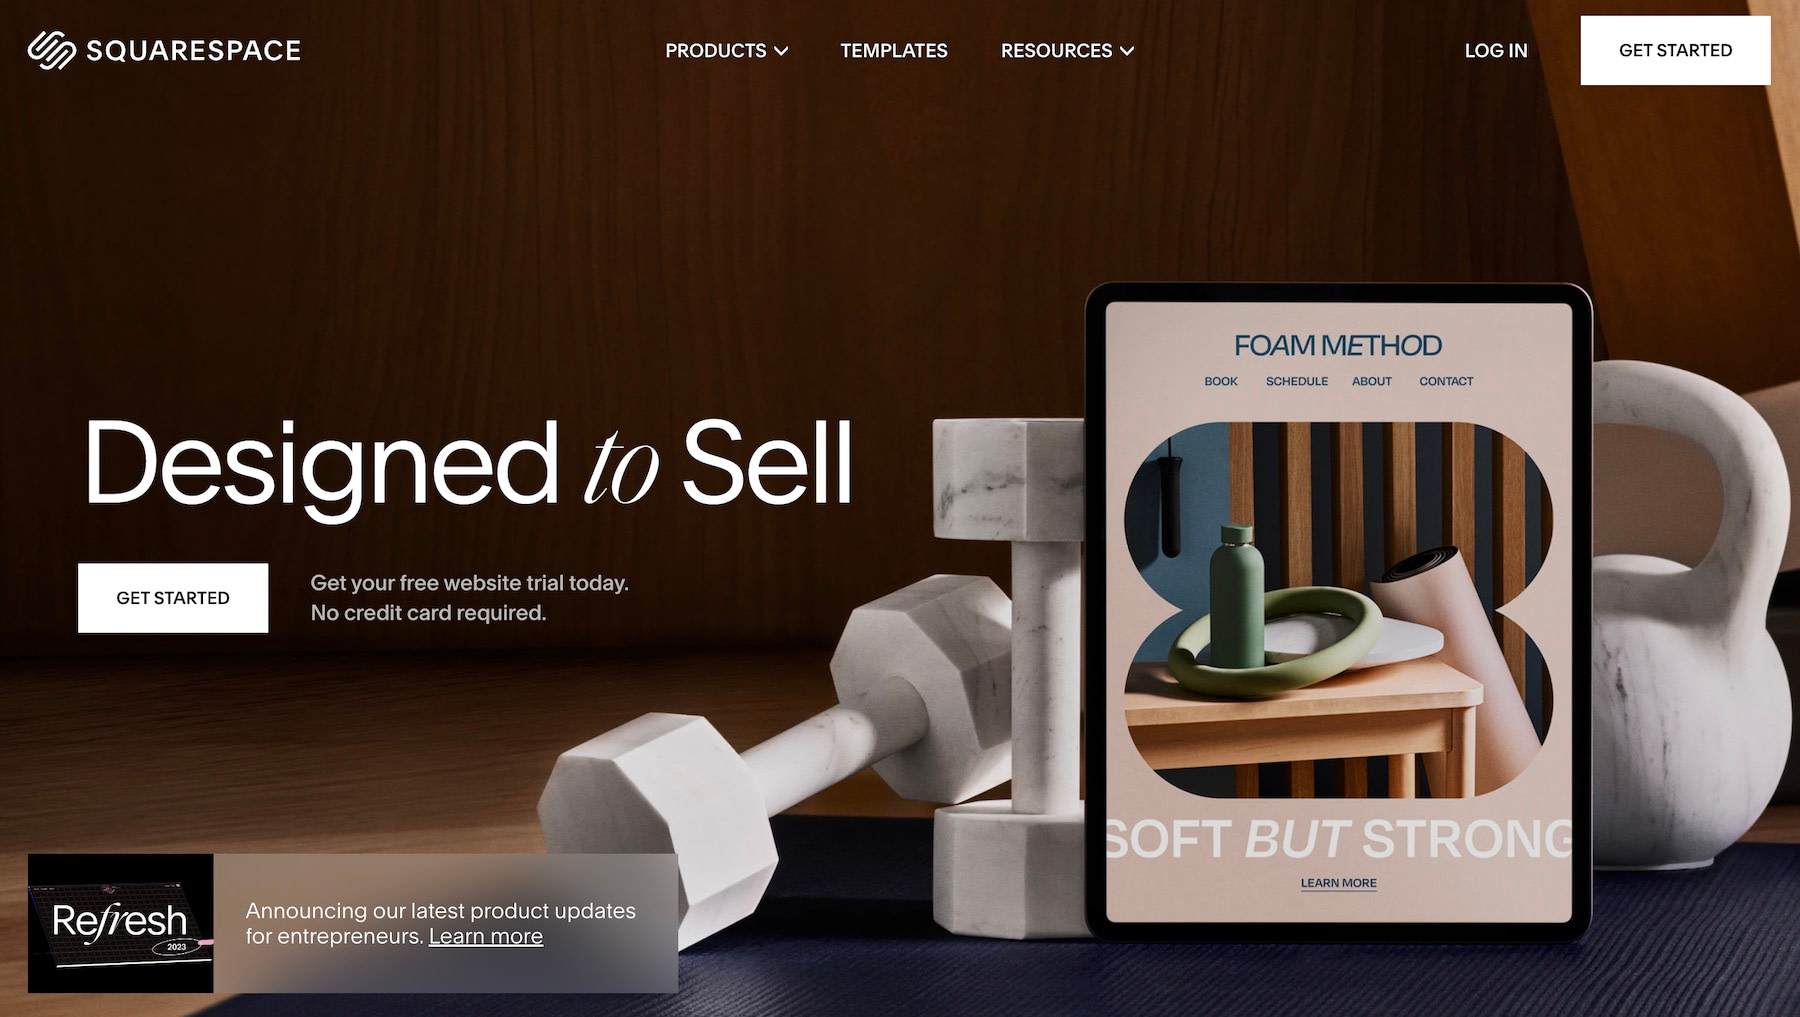 Click Get Started if you're ready to learn how to use Squarespace